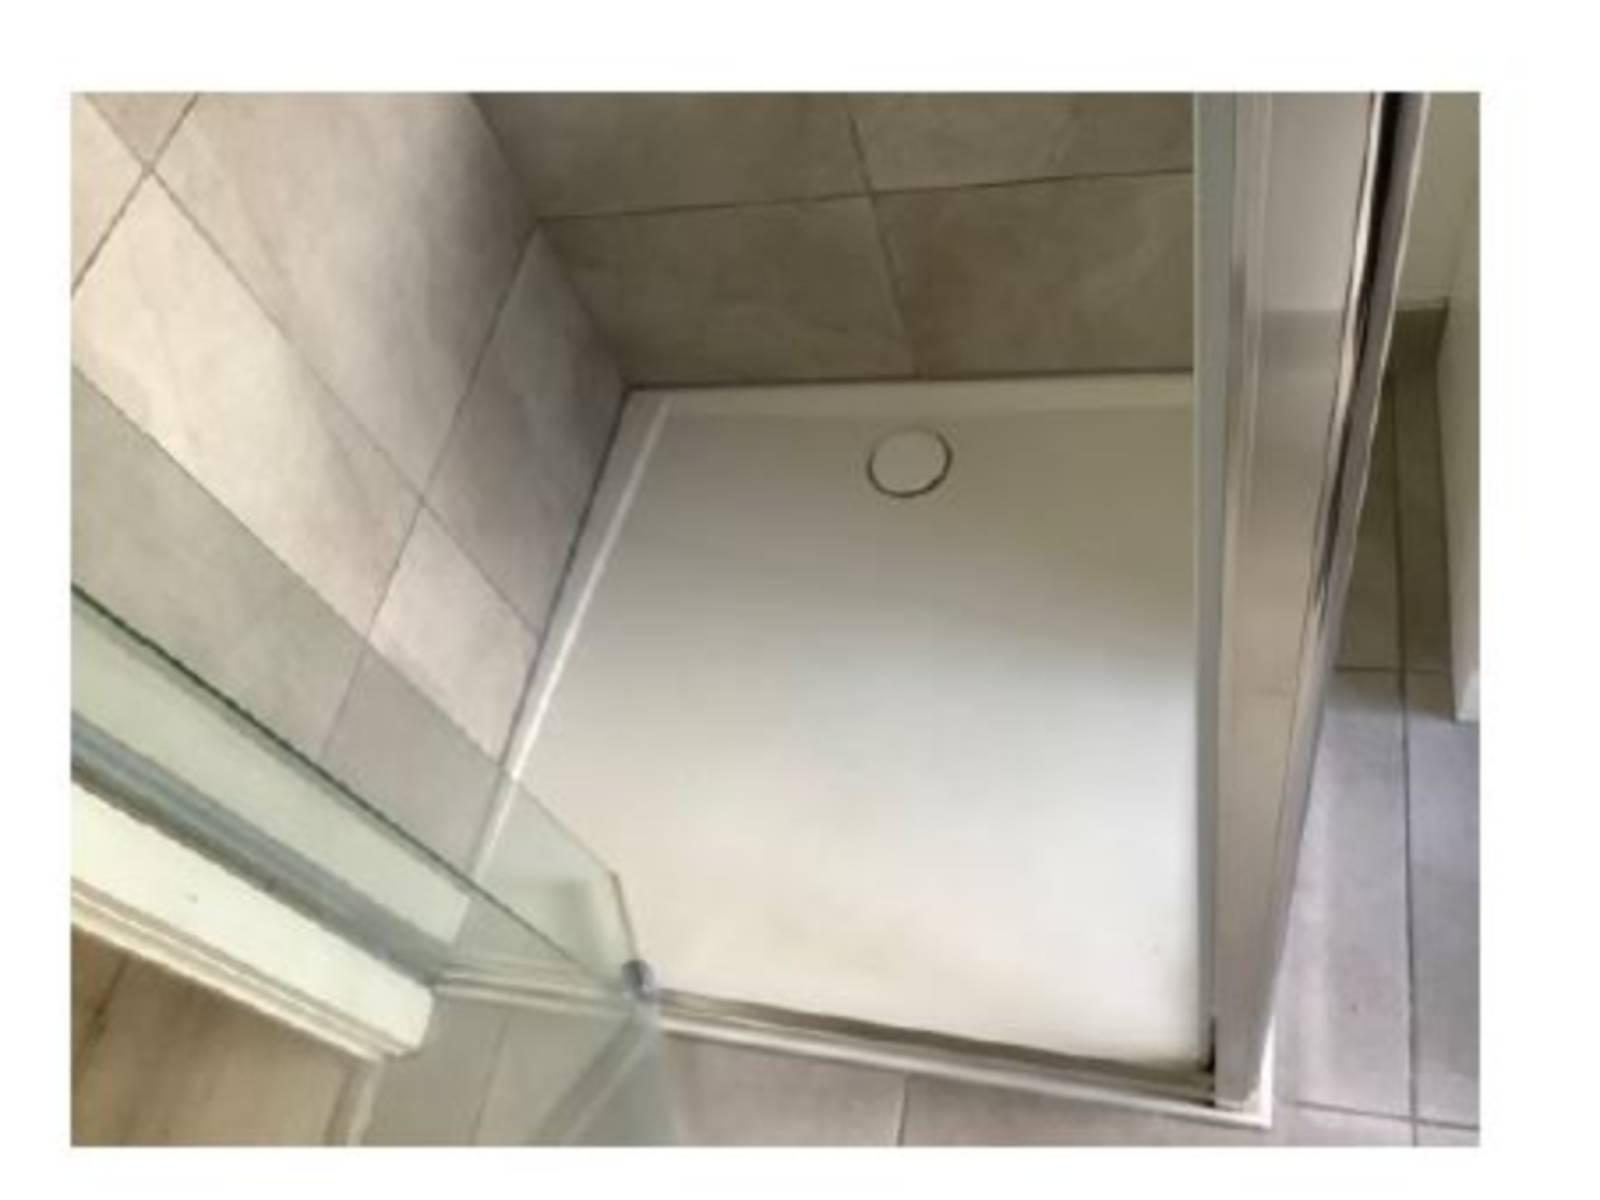 Shower Base - Drummy, how to find it?